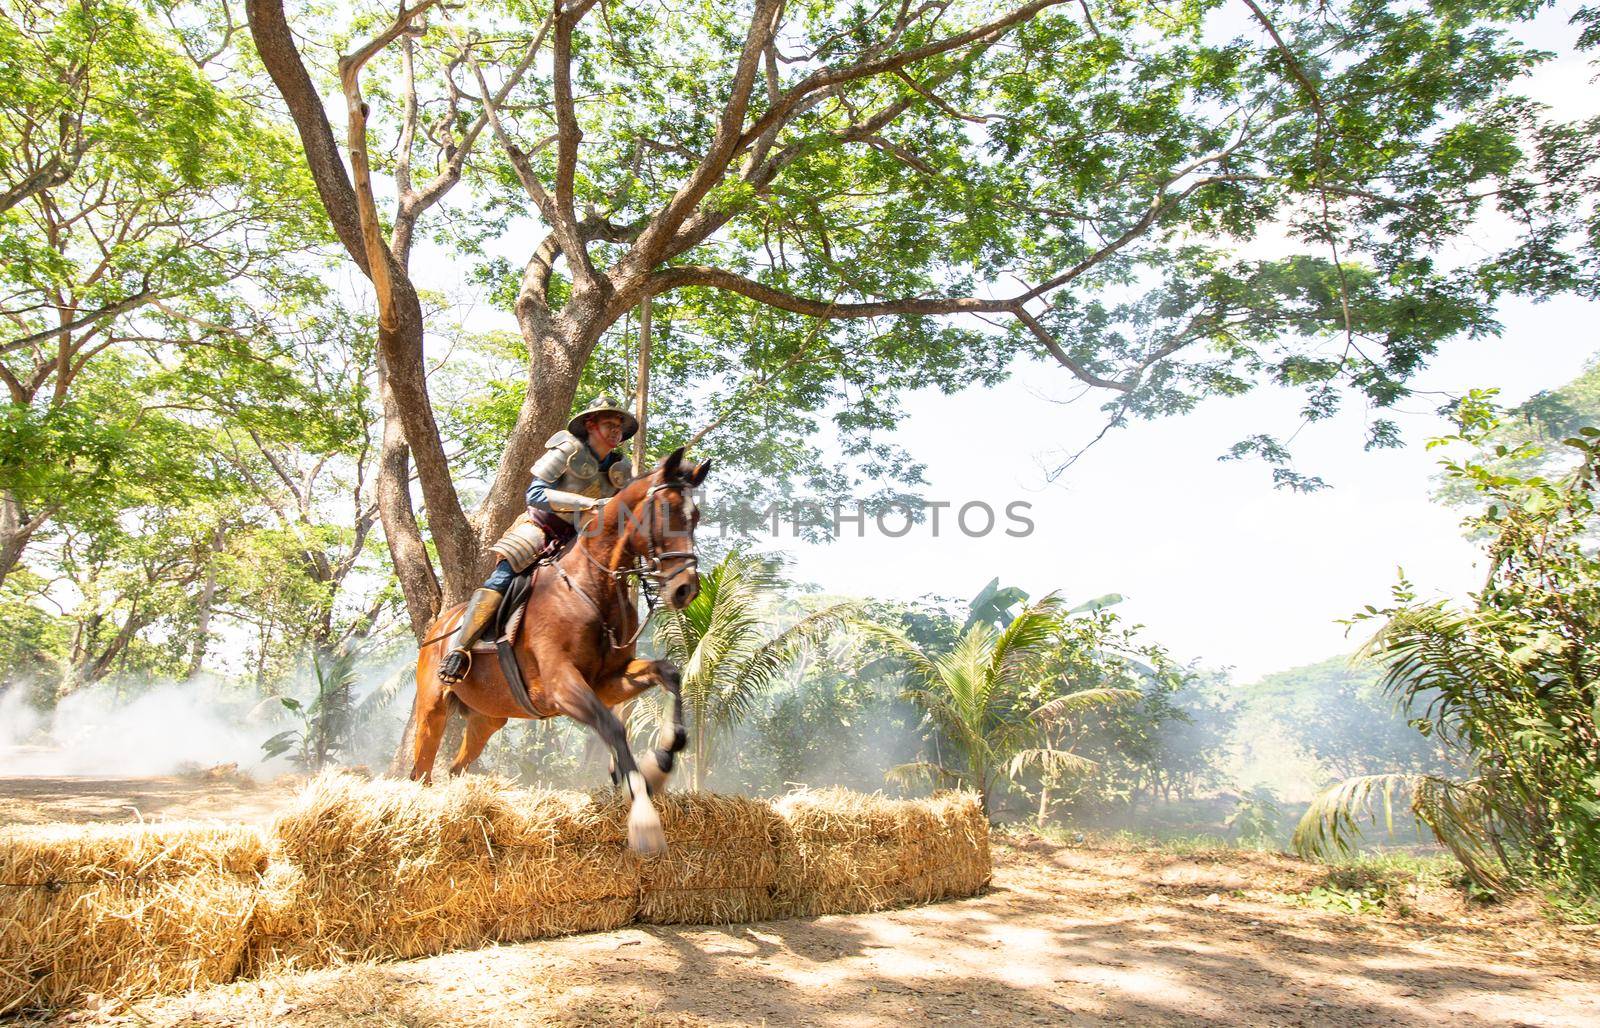 Aisan Thai soldier in the history scene with armor suit costume and horse	
 by chuanchai